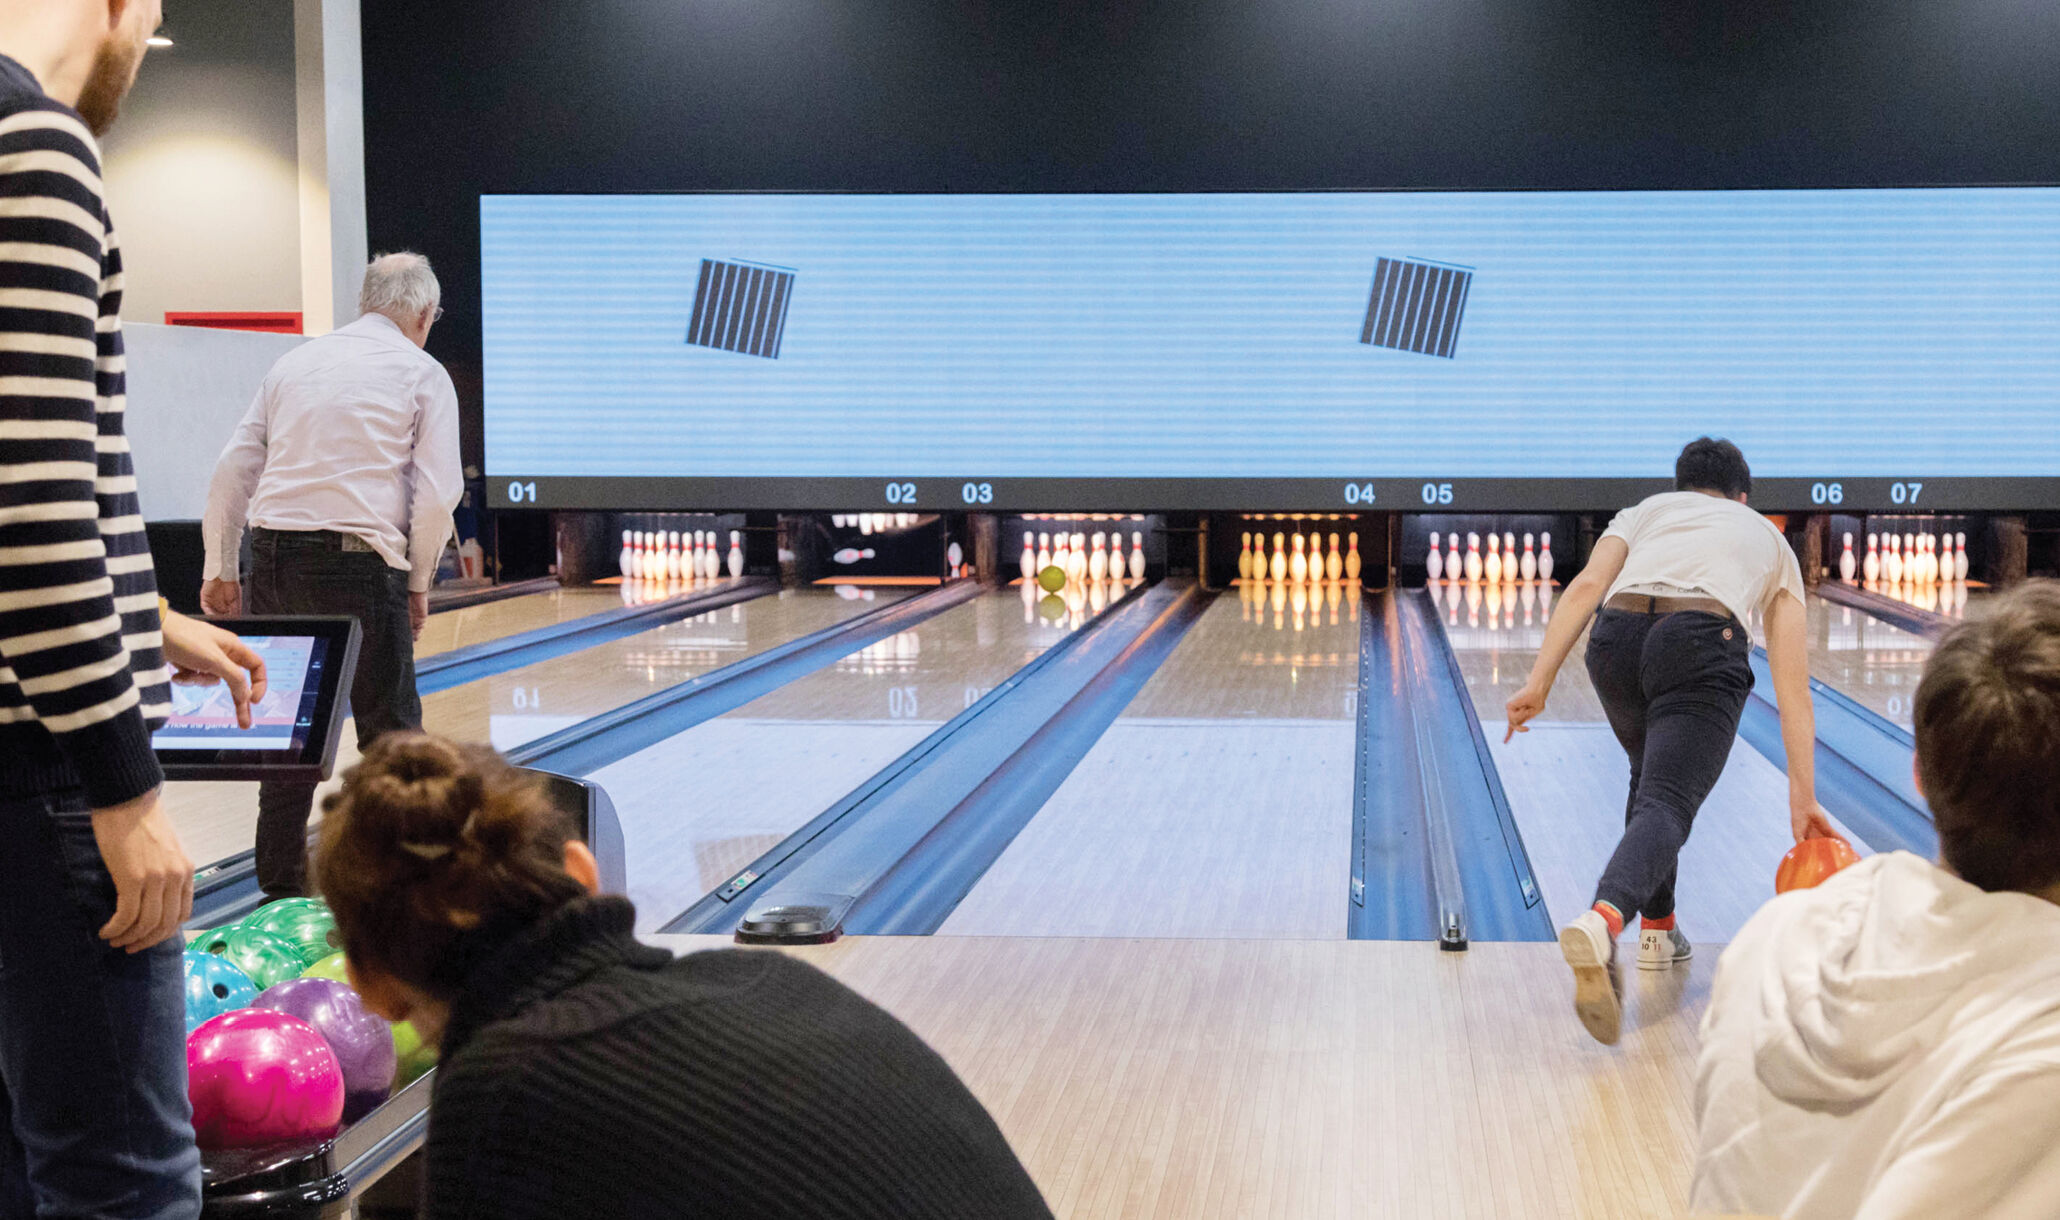 1055 Bourg, Bourg En Bresse, France - Customers Bowling-1